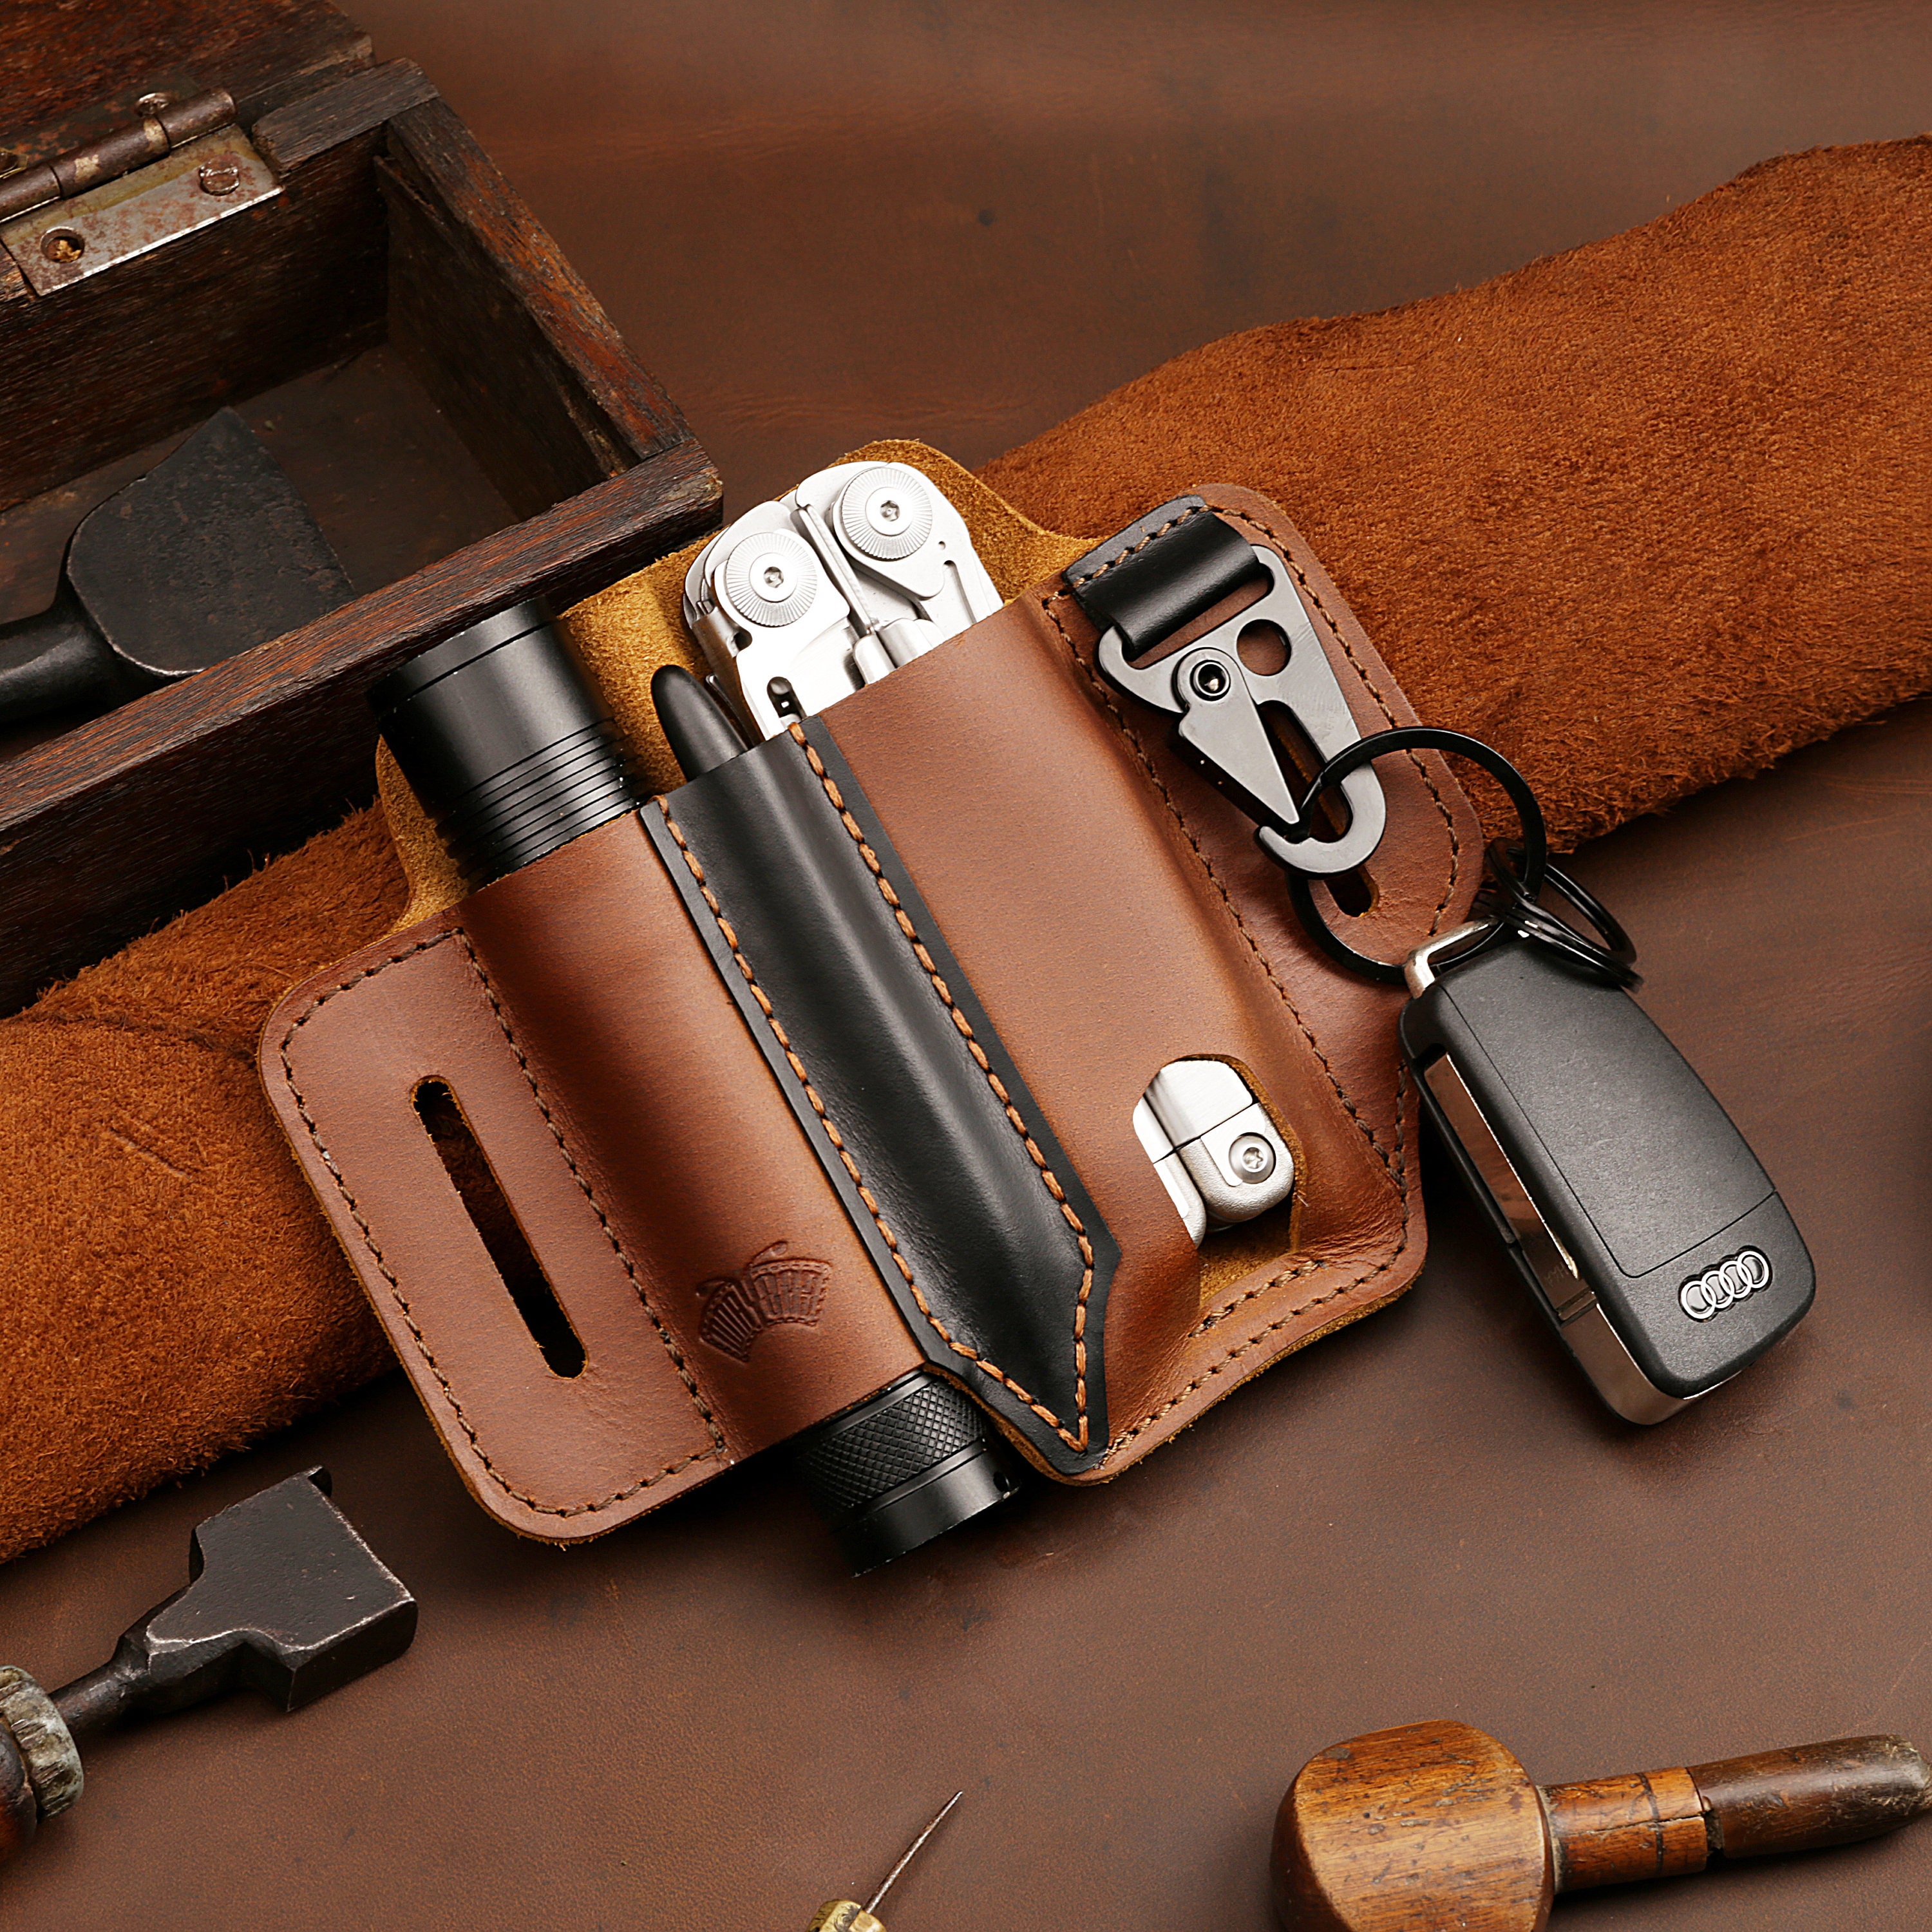  Hide & Drink, Multi-Tool Pocket Pouch, Compact Multipurpose EDC Zippered  Bag, Mini Camping Tool Case, Waxed Canvas, Knife Holster, Handmade Slim  Organizer, Honey Bourbon : Tools & Home Improvement